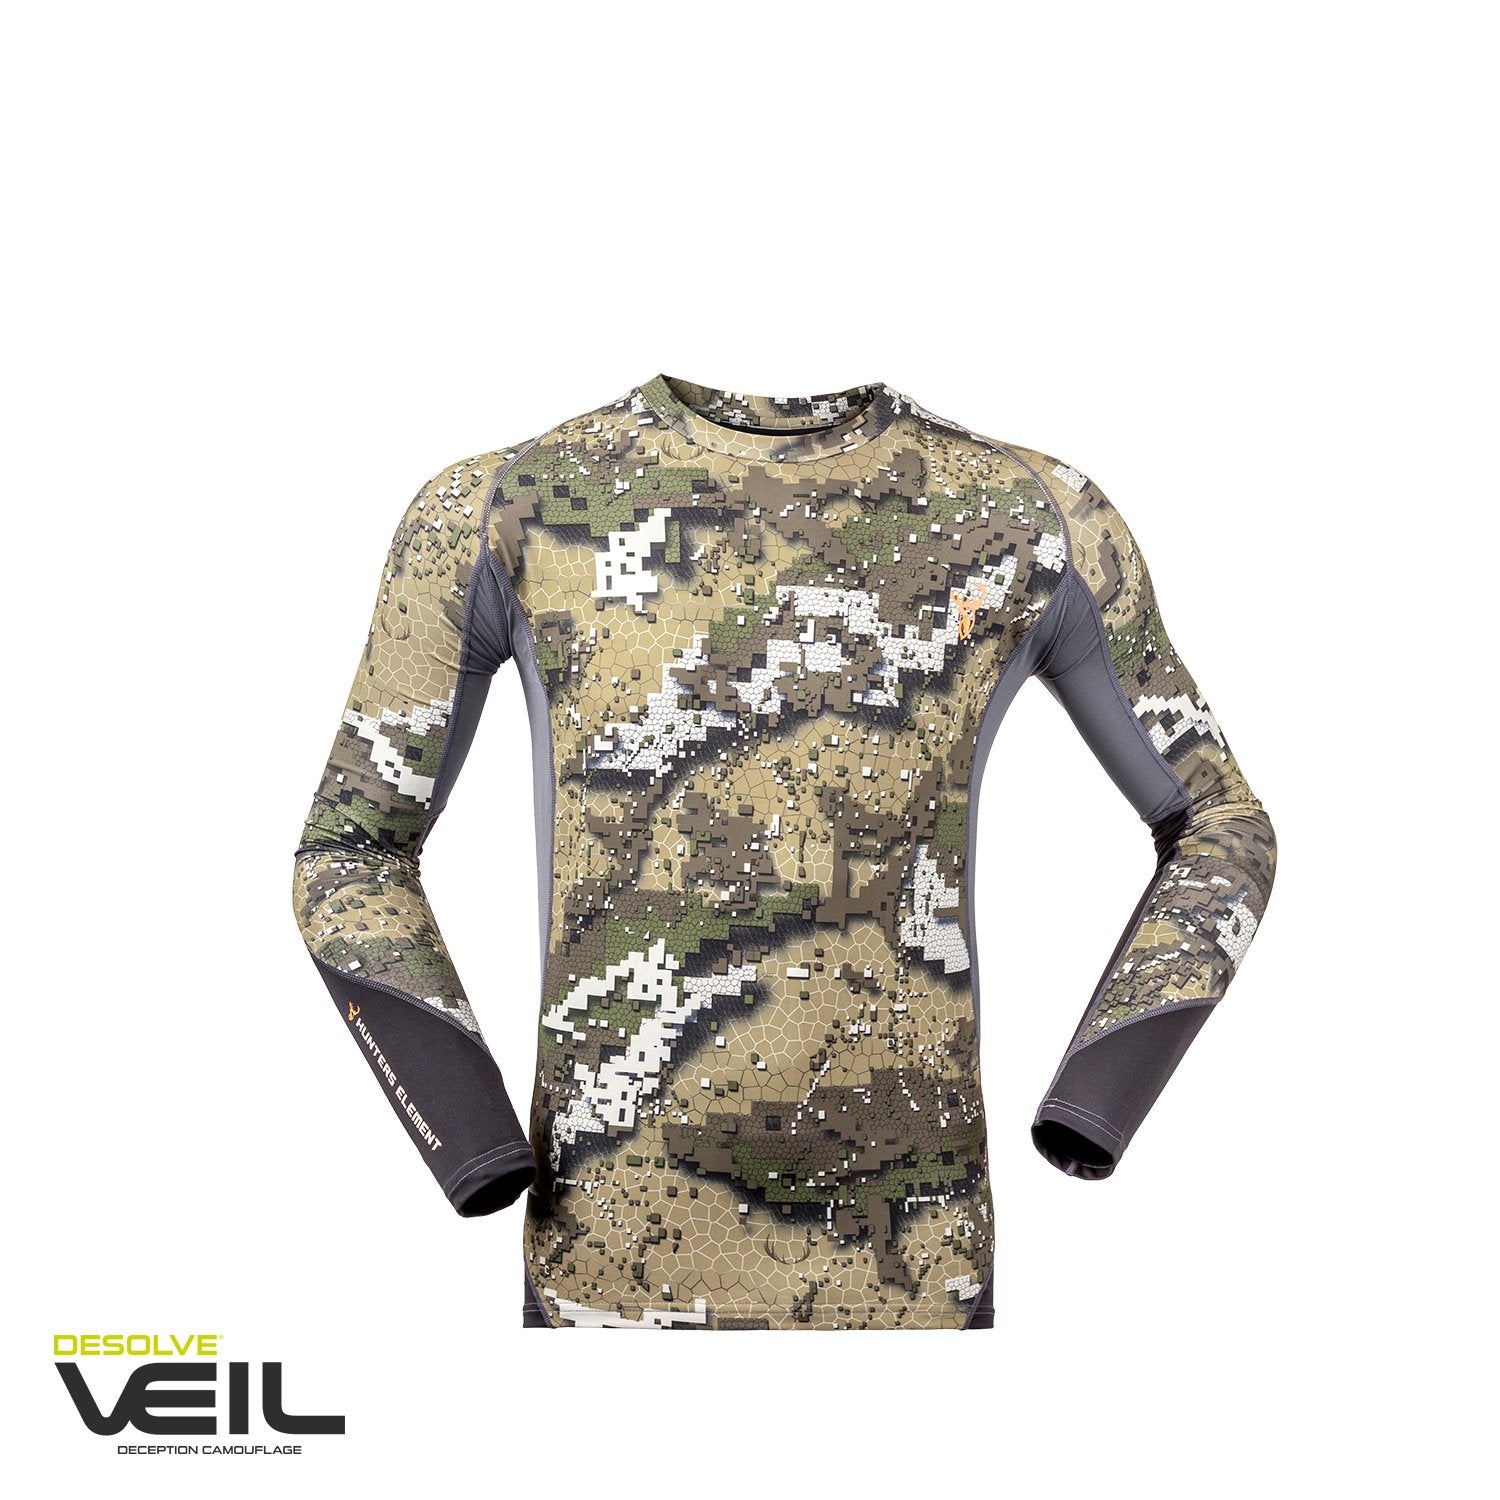 Hunters Element Core Top Desolve Veil - S - Mansfield Hunting & Fishing - Products to prepare for Corona Virus